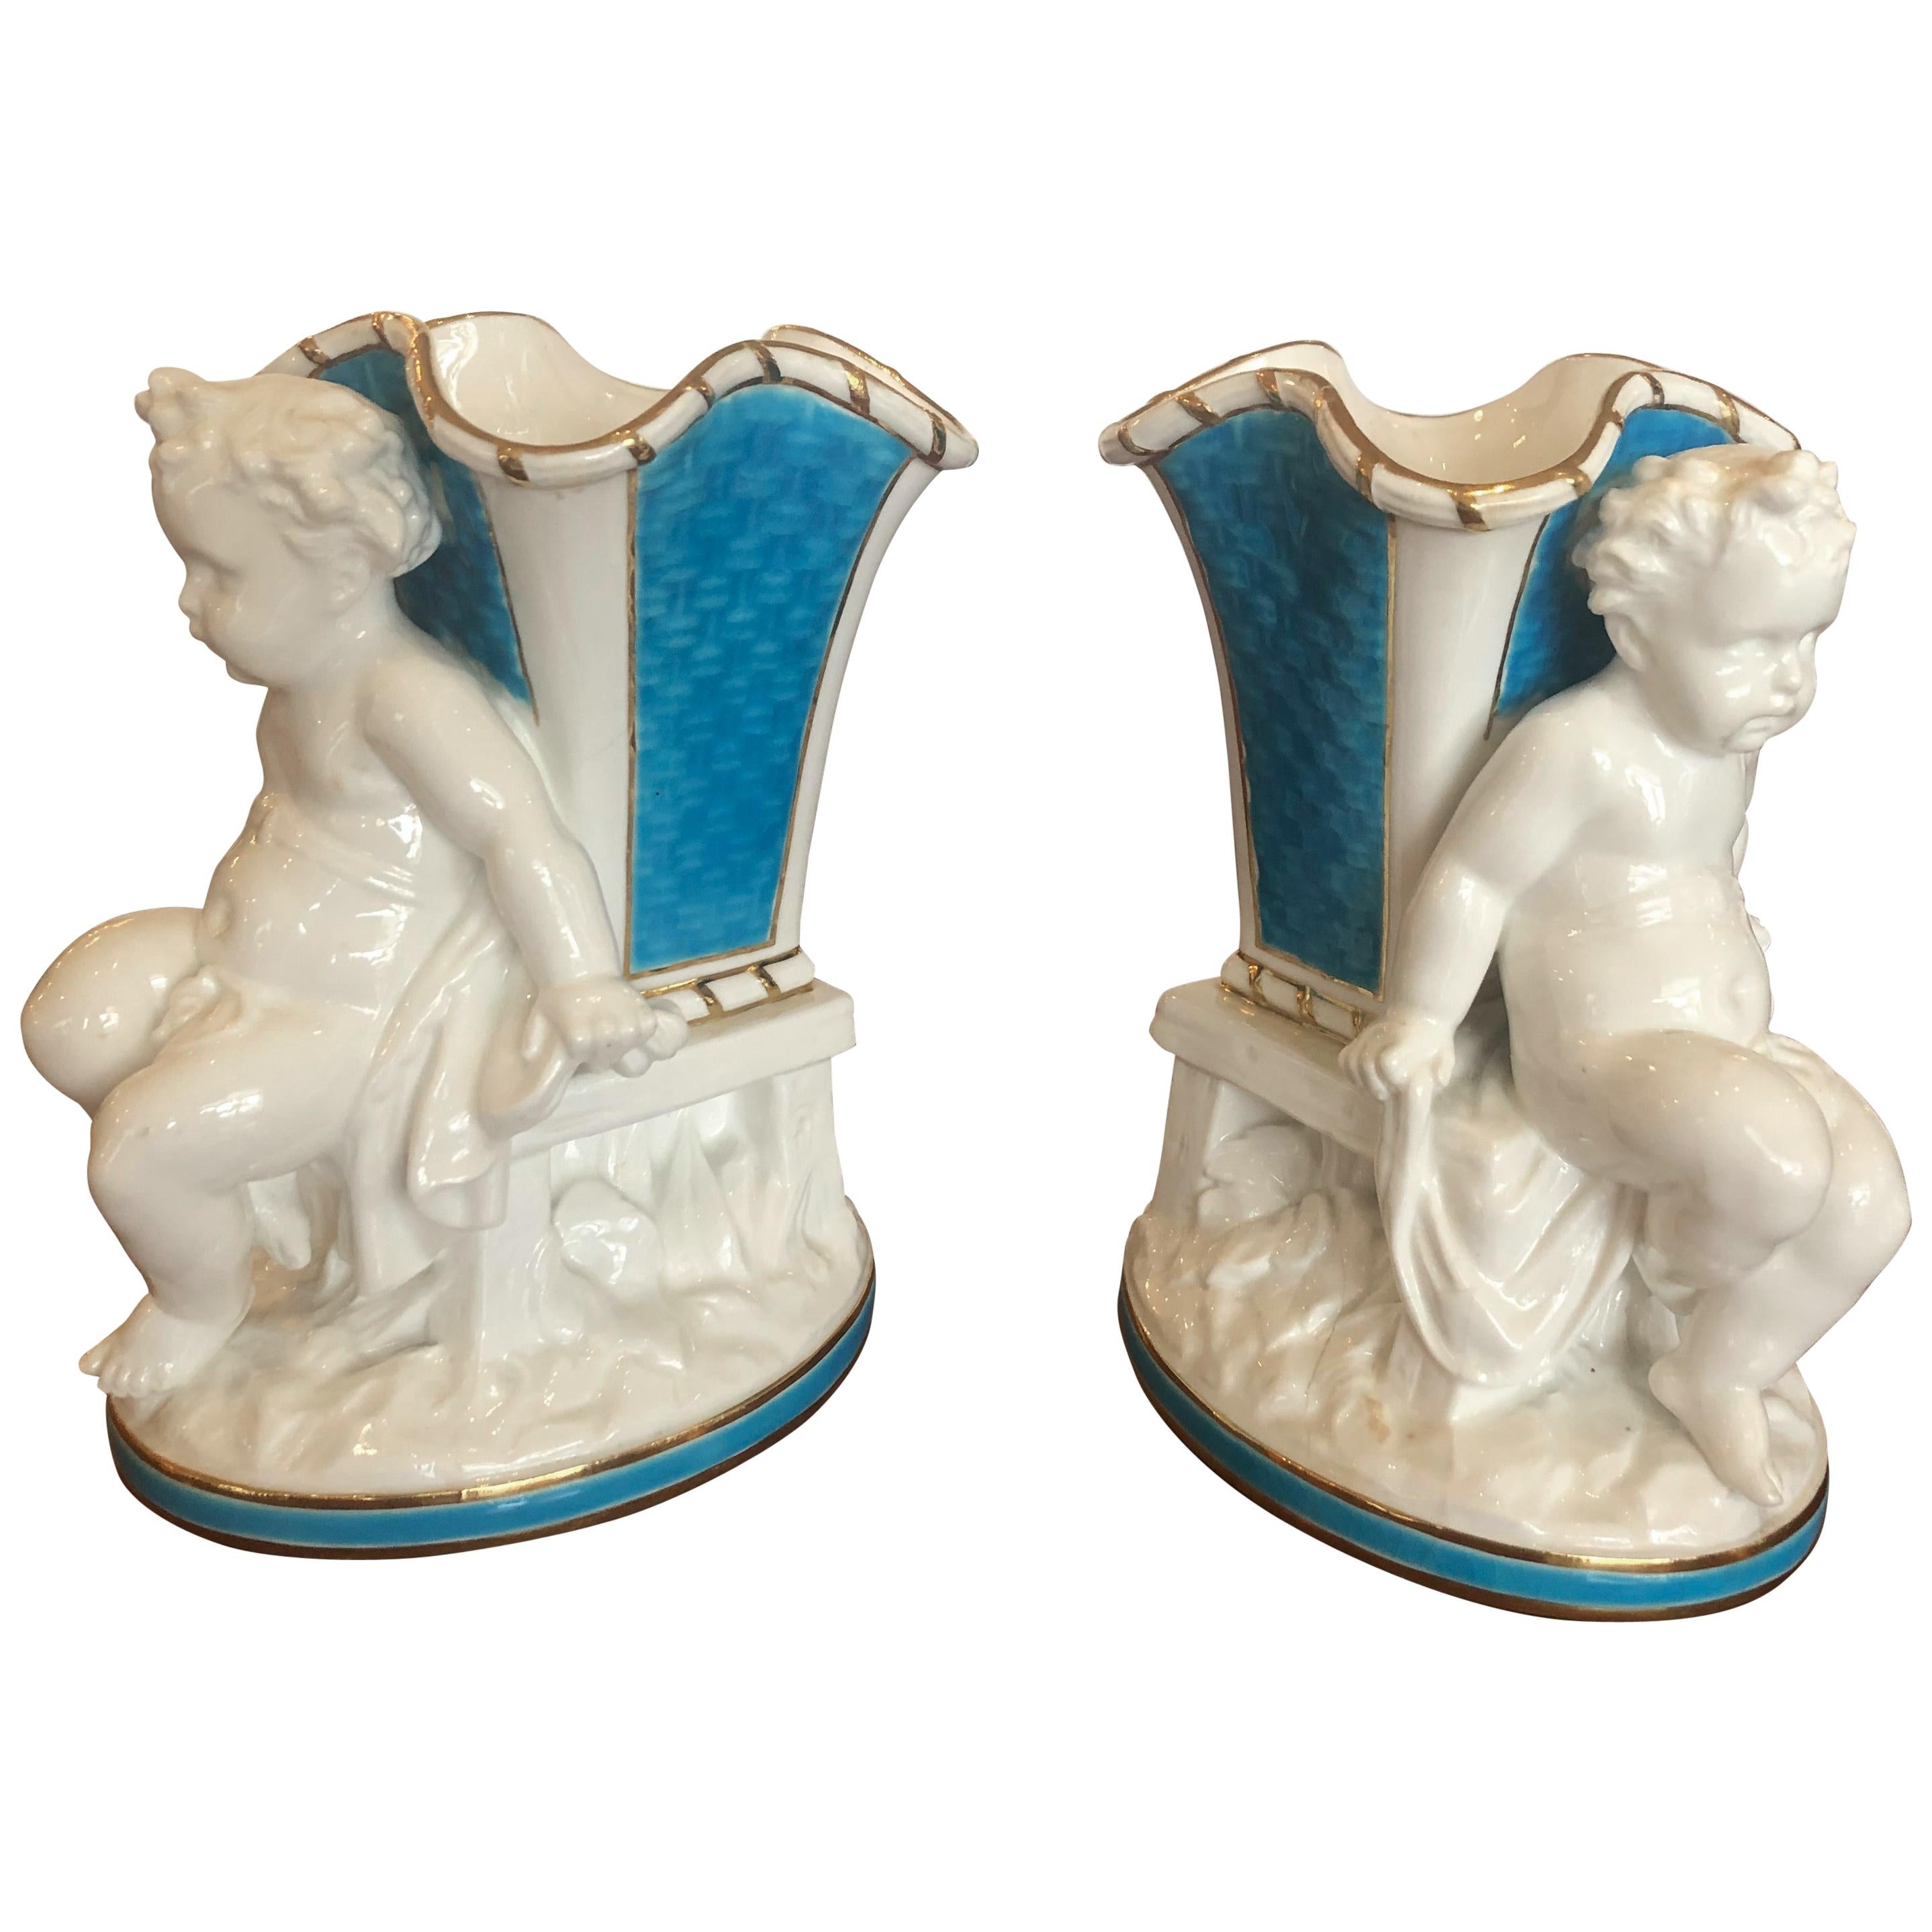 Superb Rare Pair of Cherub Minton Caldwell Tiffany Blue and White Spill Vases For Sale